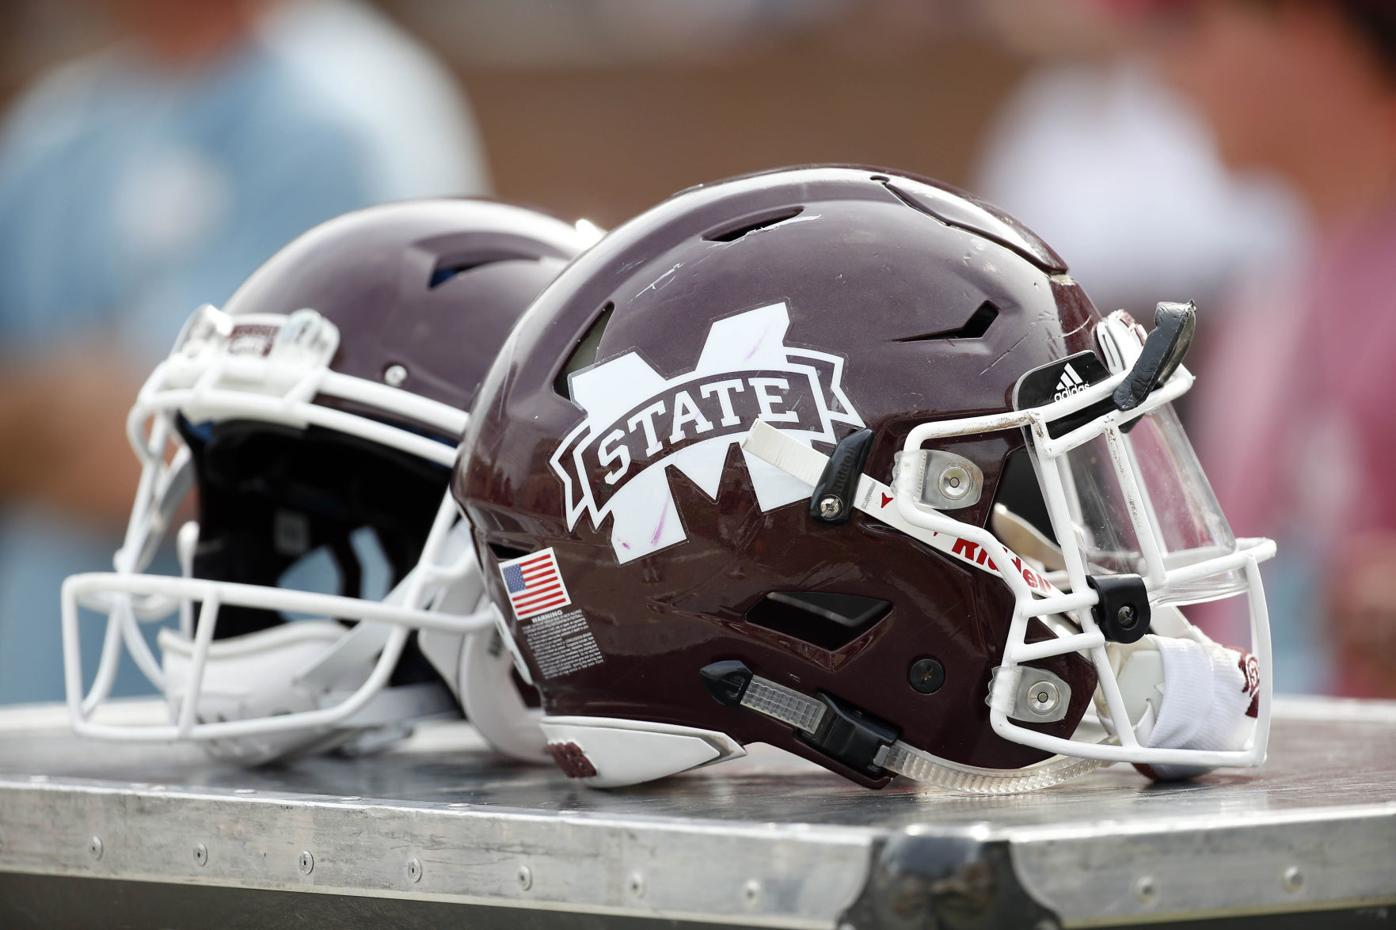 Mississippi State University 2022 Football Schedule Mississippi State 2020 Football Schedule Analysis | Sports | Djournal.com